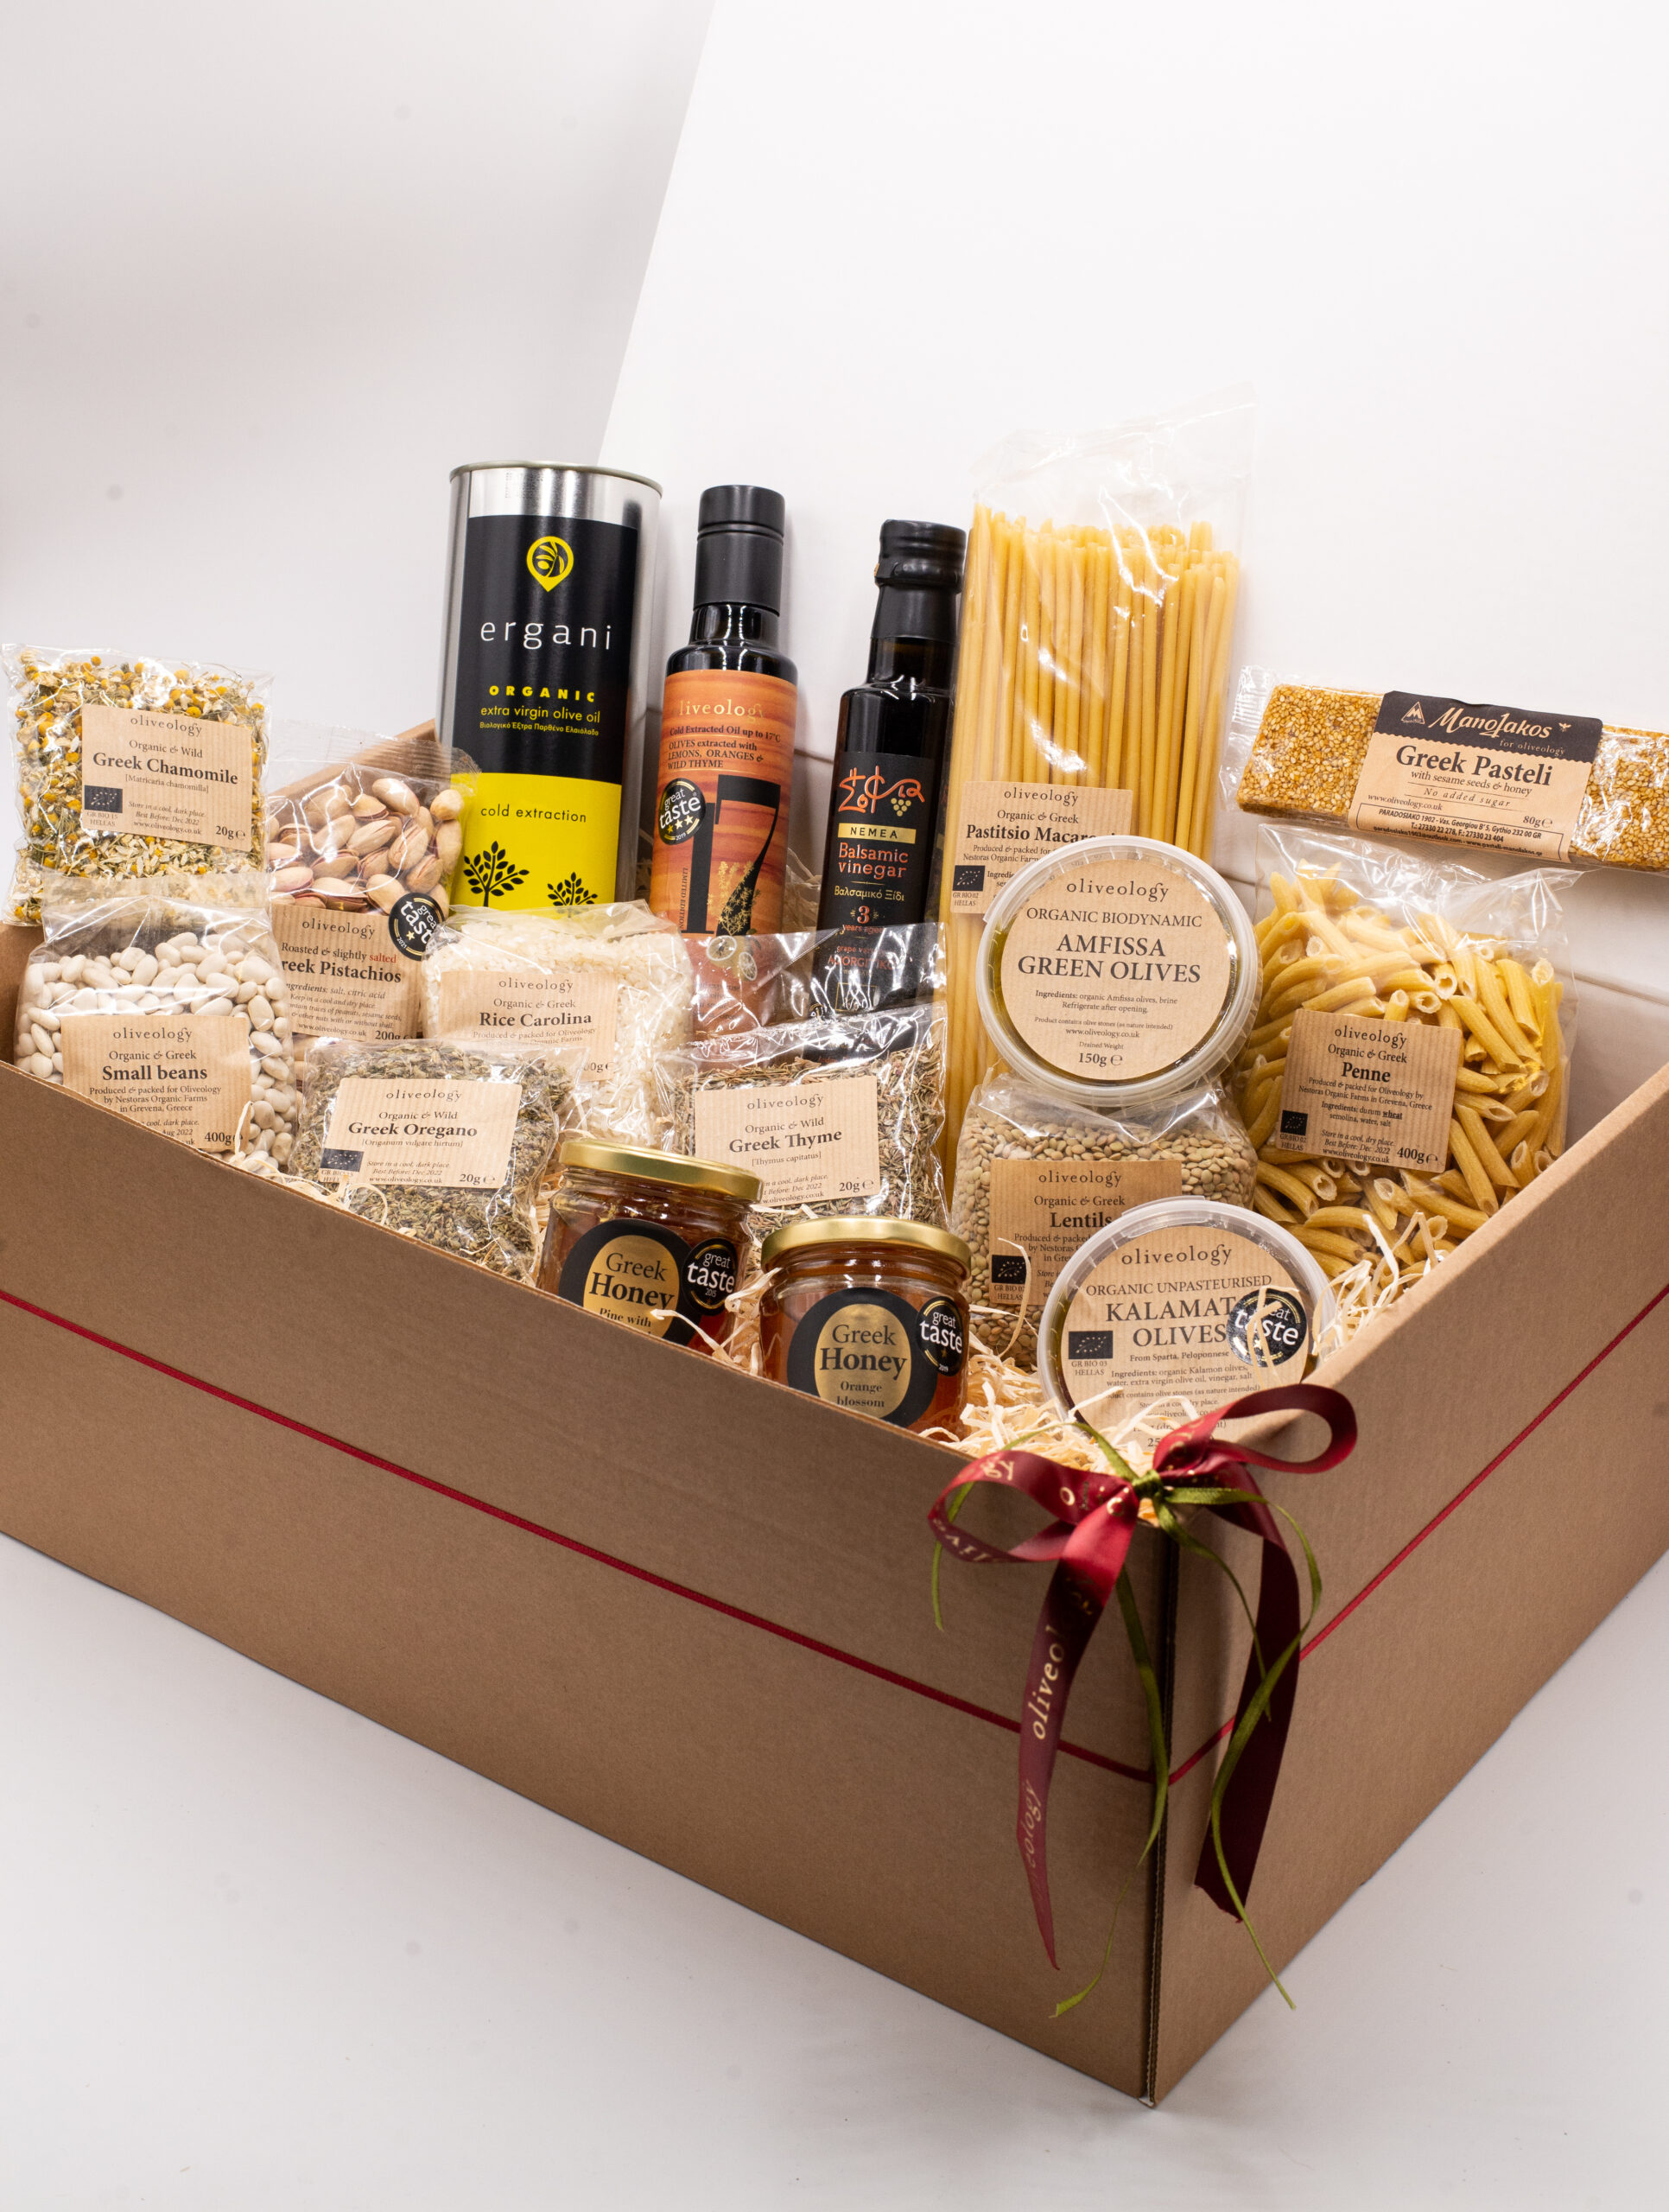 The Everything Hamper – Oliveology Organic Artisan Products